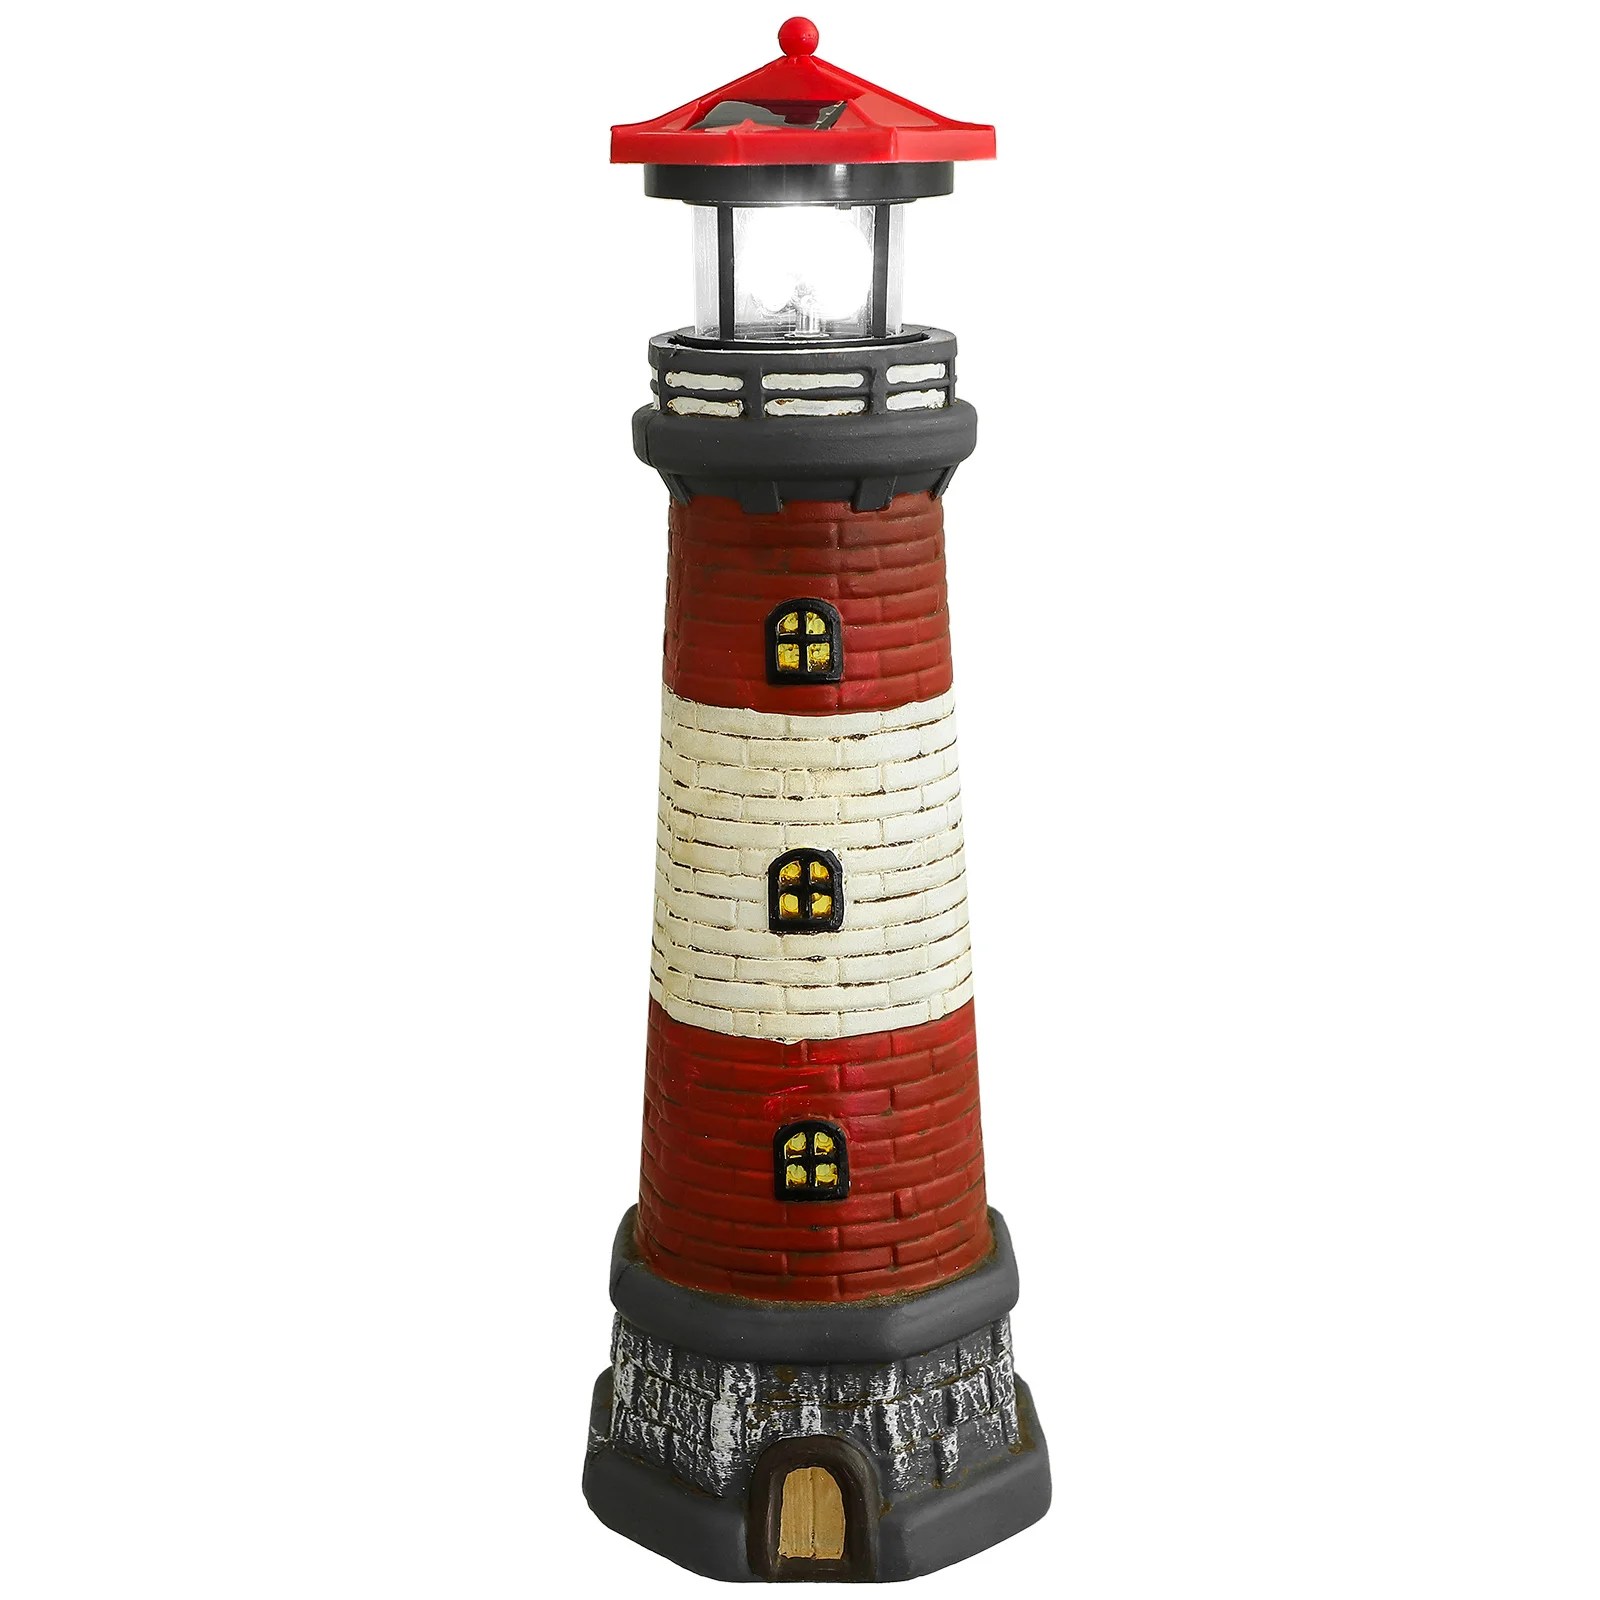 

Solar Light Tower Garden Lights Outdoor Adornment Accessories Resin Craft Ornaments Lawn Glowing Statue Yard Lighthouse Powered